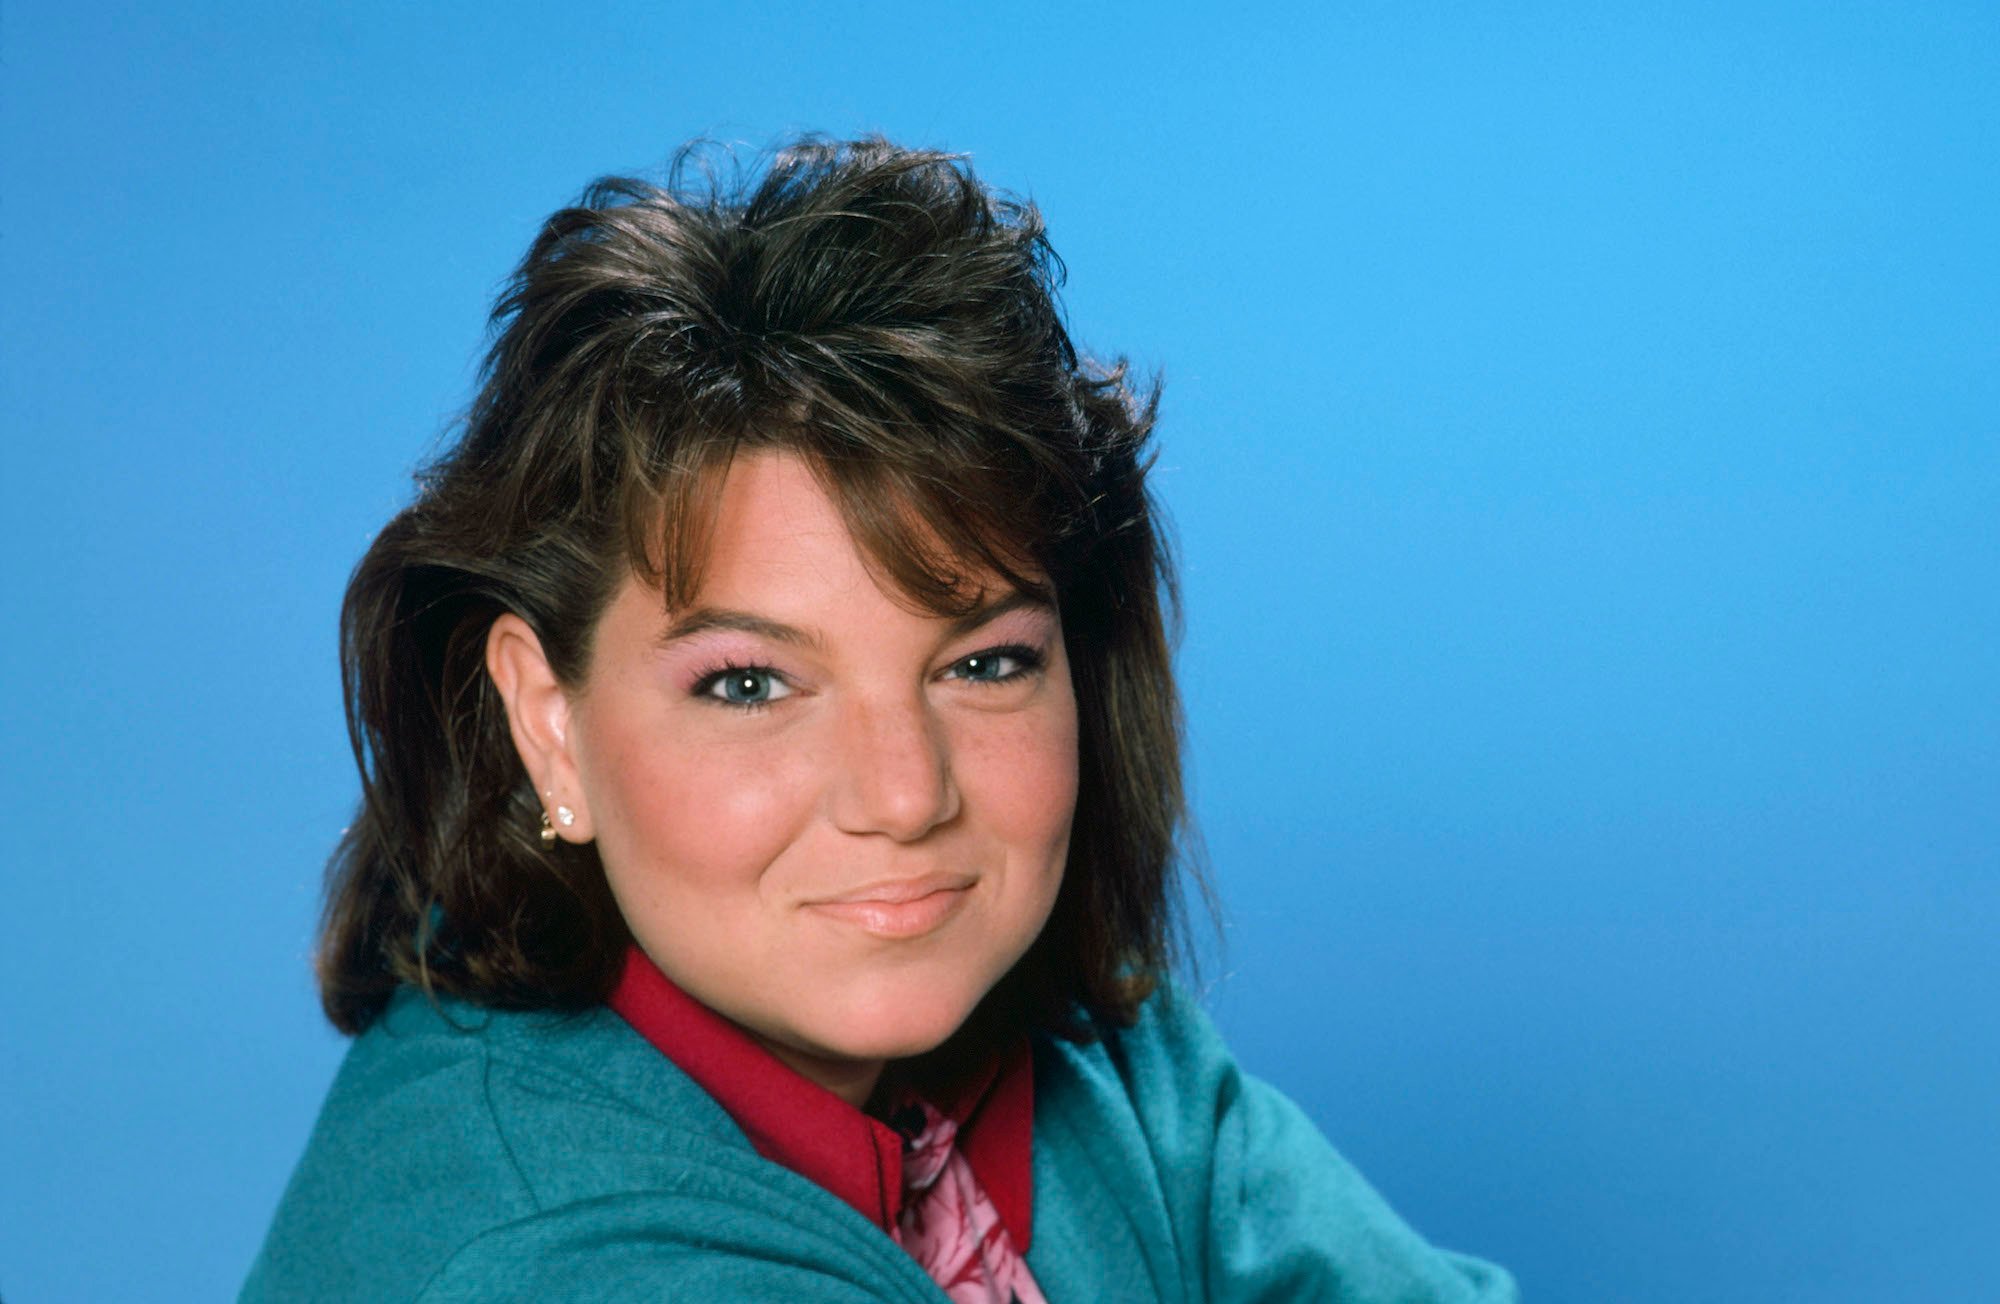 Mindy Cohn smiling in front of a blue background